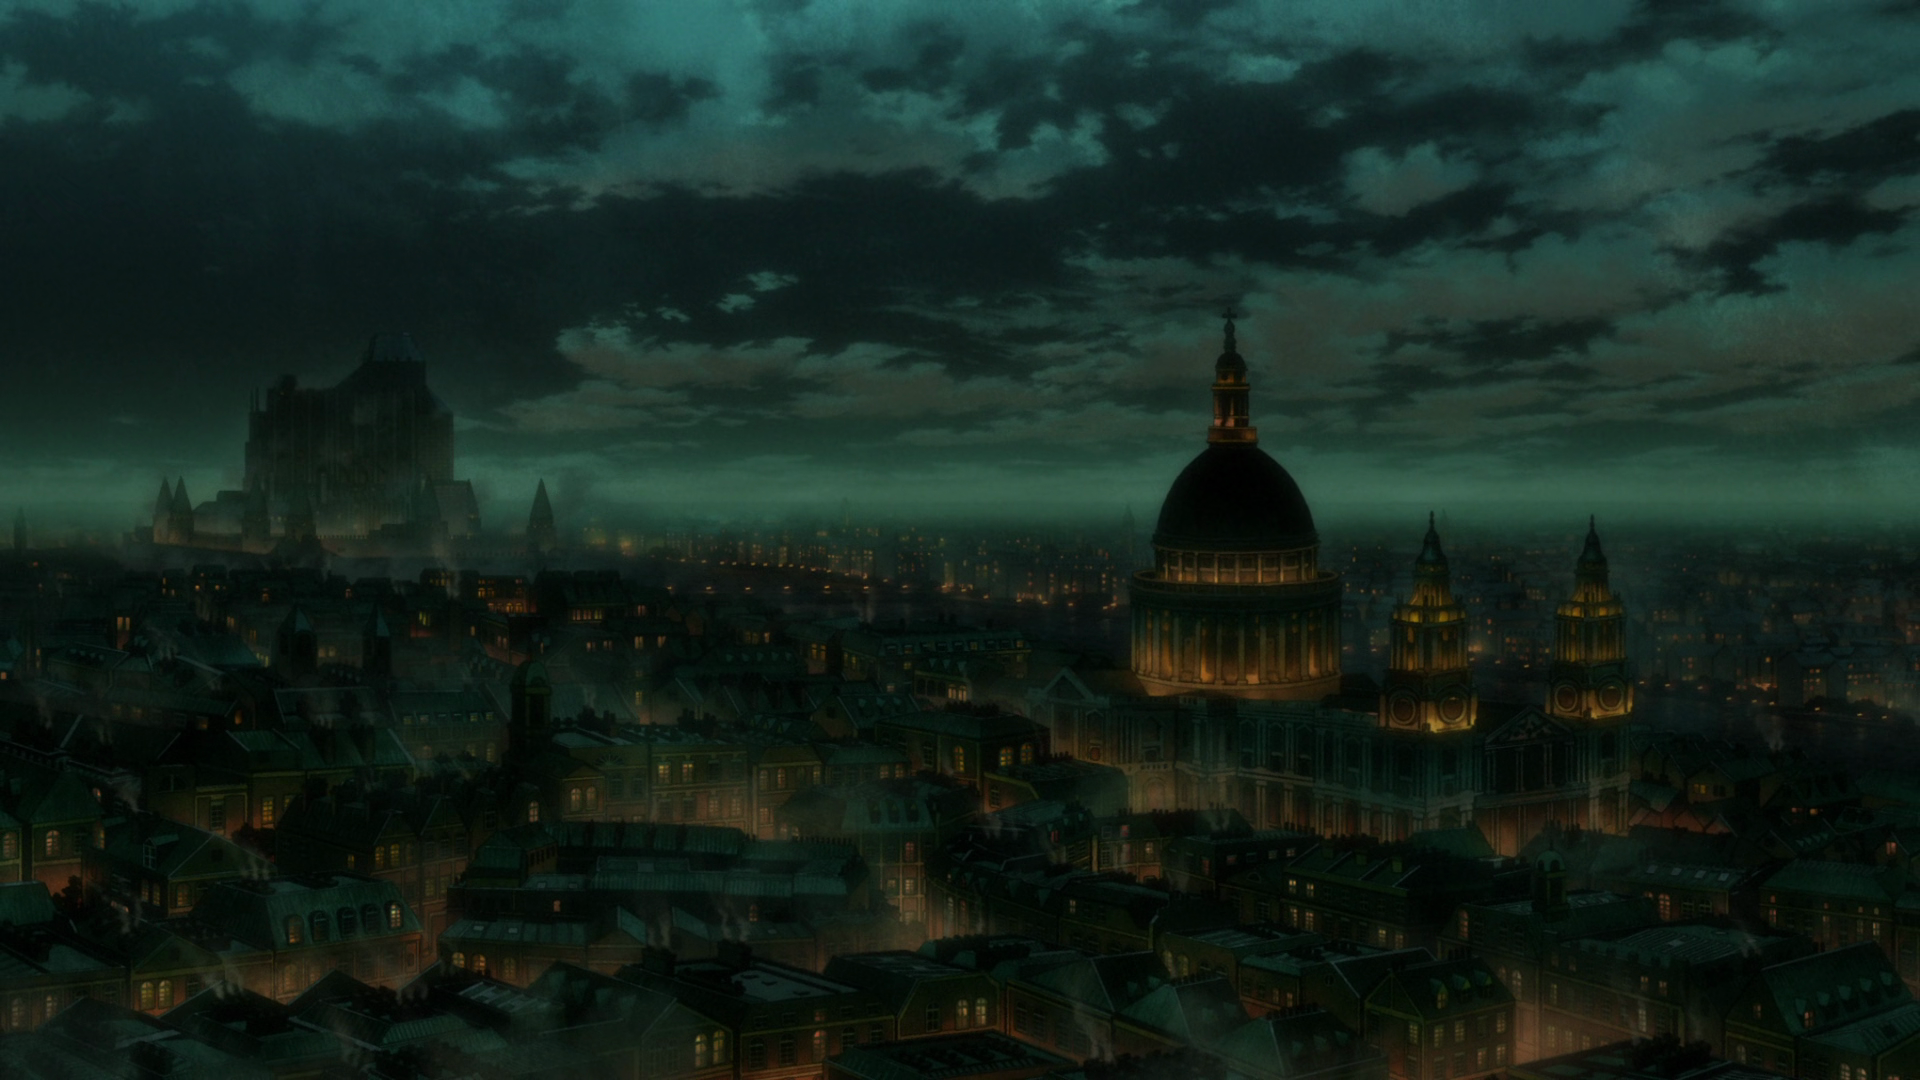 London Empire Of The Dead Night Clouds Sky Artwork Cityscape City Lights 1920x1080